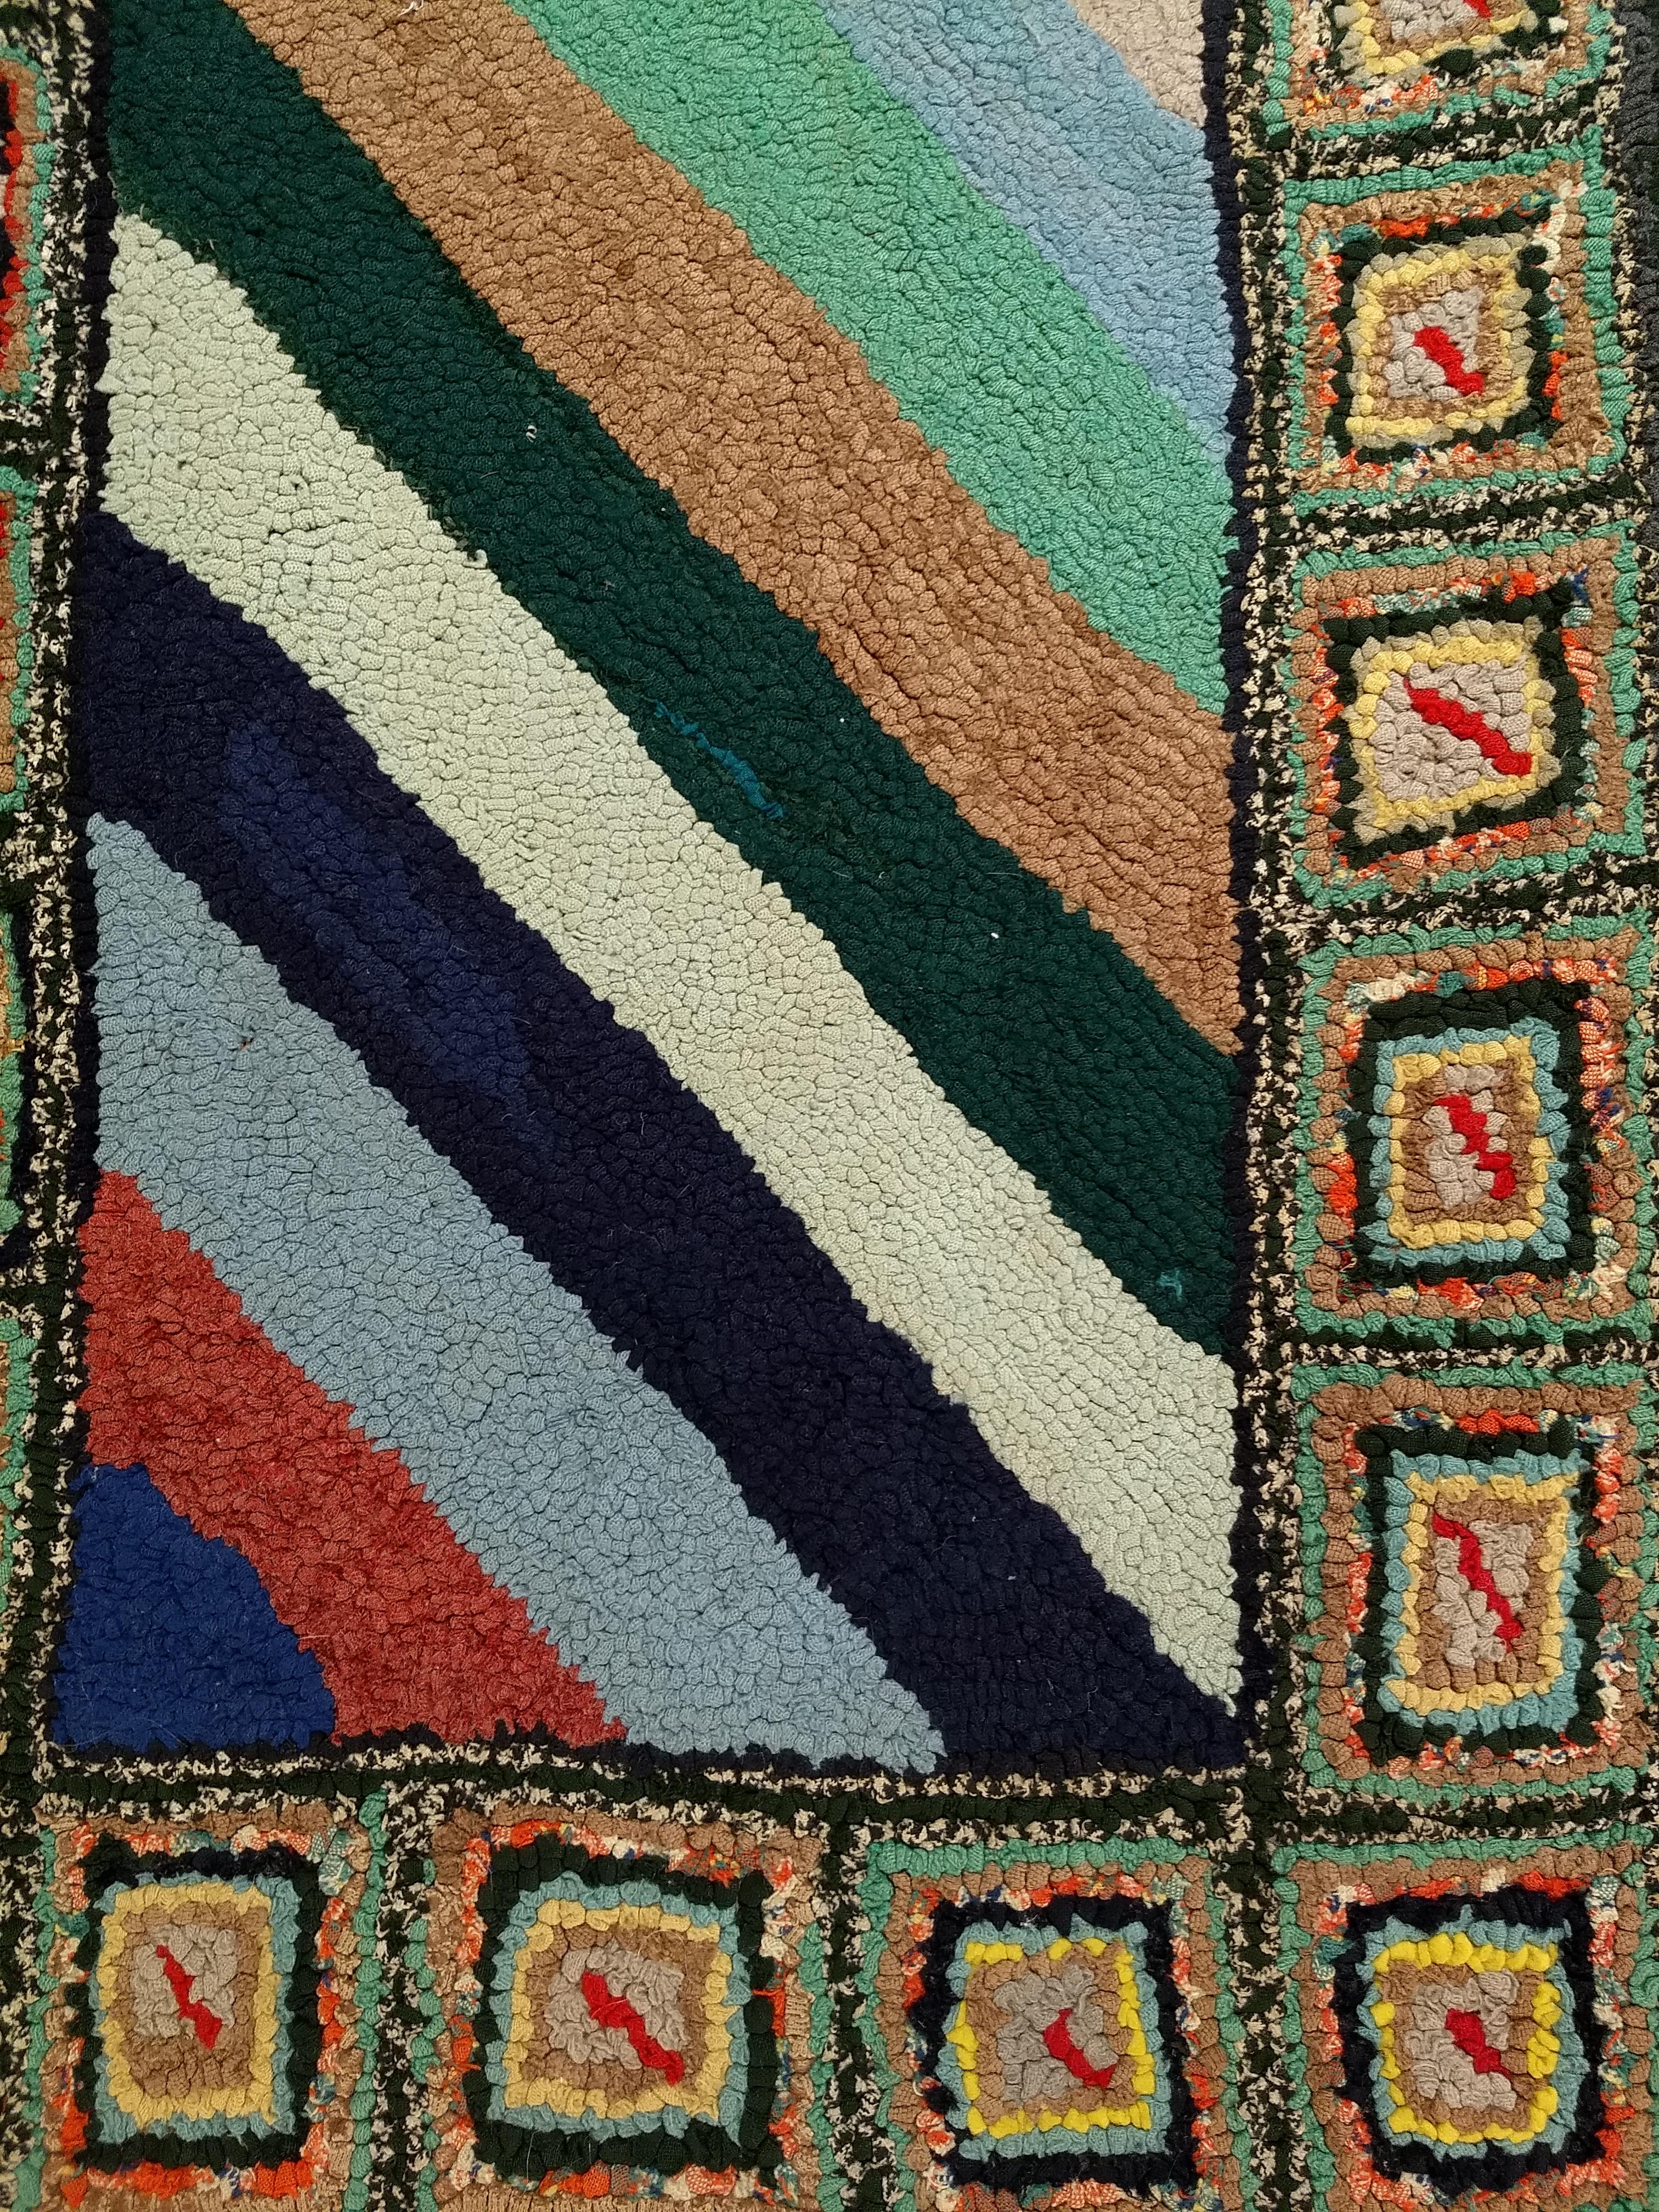 Late 19th Century Vintage American Hand Hooked Rug with a Stripe Pattern as Tapestry Wall Art For Sale